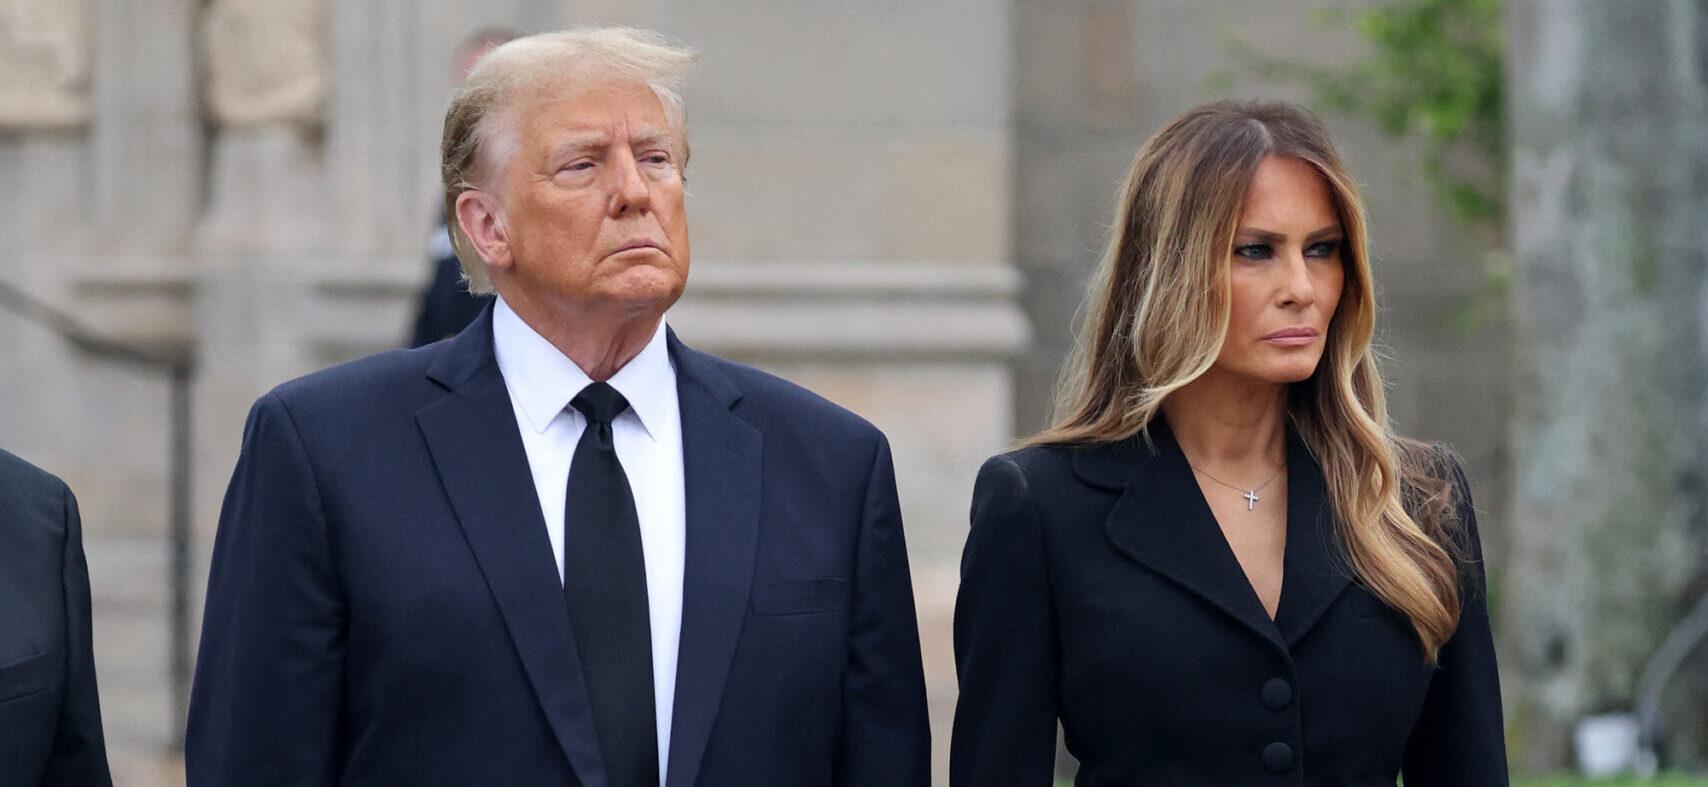 Donald Trump’s Marriage To Melania Is Allegedly Only ‘Business And Not Pleasure’